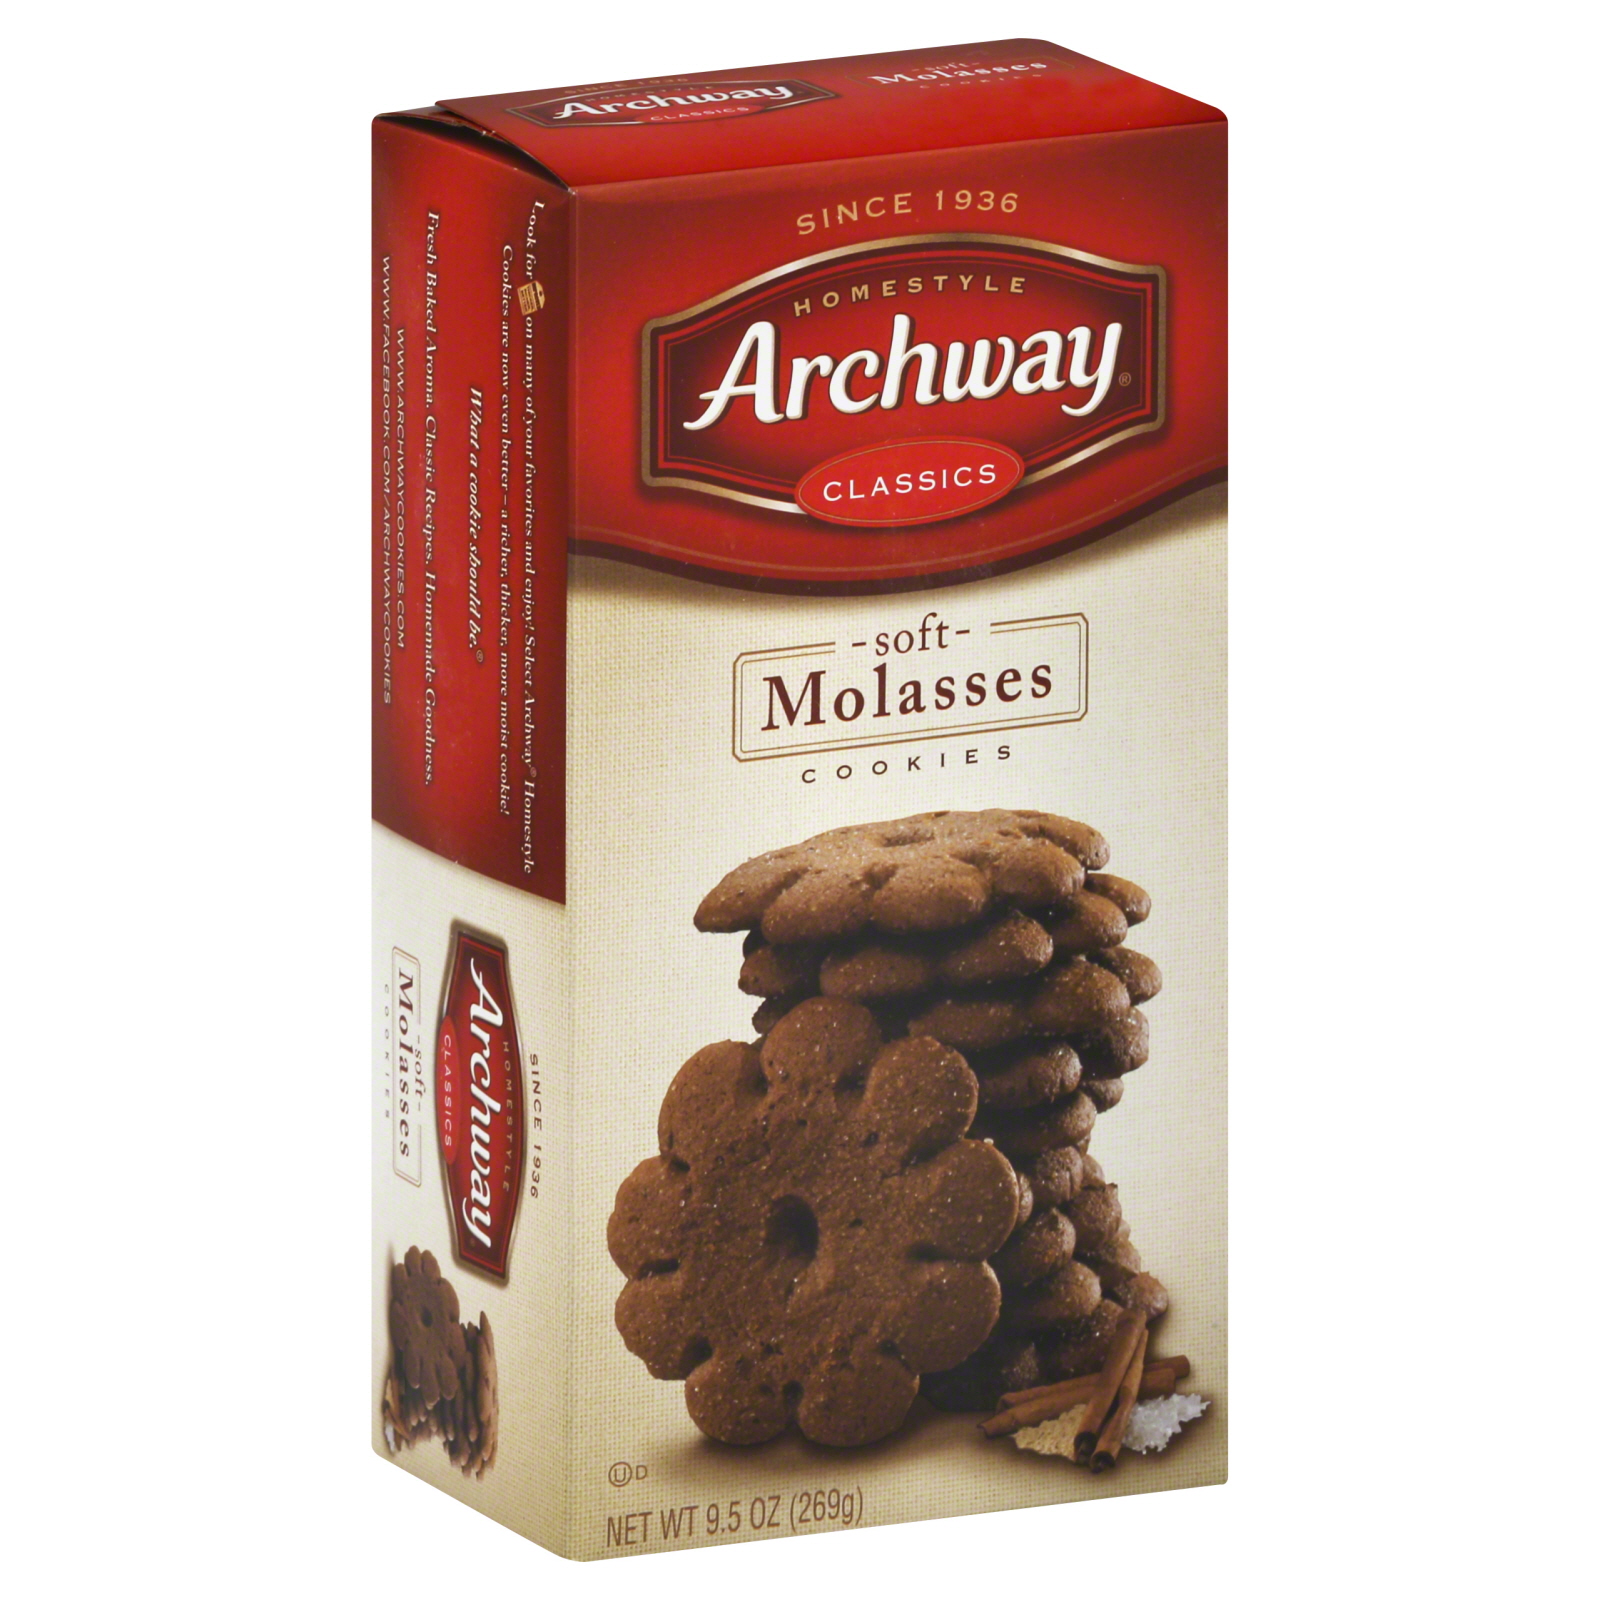 Archway Home Style Cookies, Old Fashioned Molasses, Original, 9.5 oz (269 g)